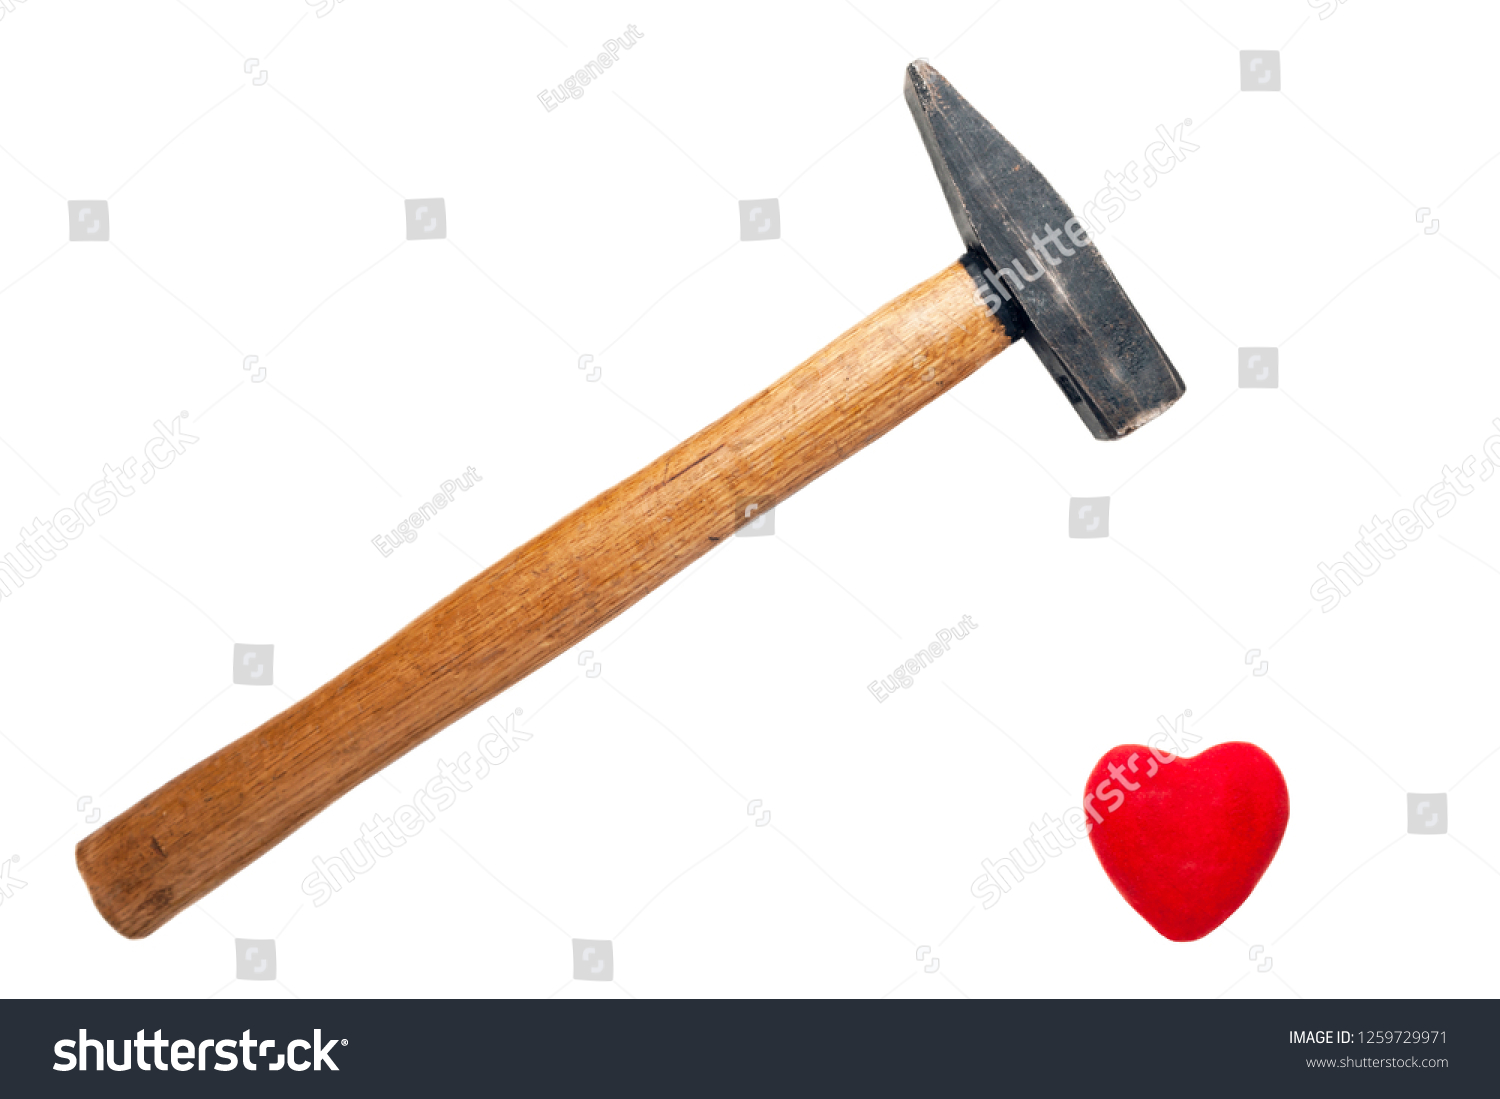 A Hammer with Wooden Handle Ready to Break, Crush Red Heart Isolated on White Background. Minimalist Healthcare, Heart attack risk, Relationship Breakup Symbol. Card, Message, Banner Design. #1259729971